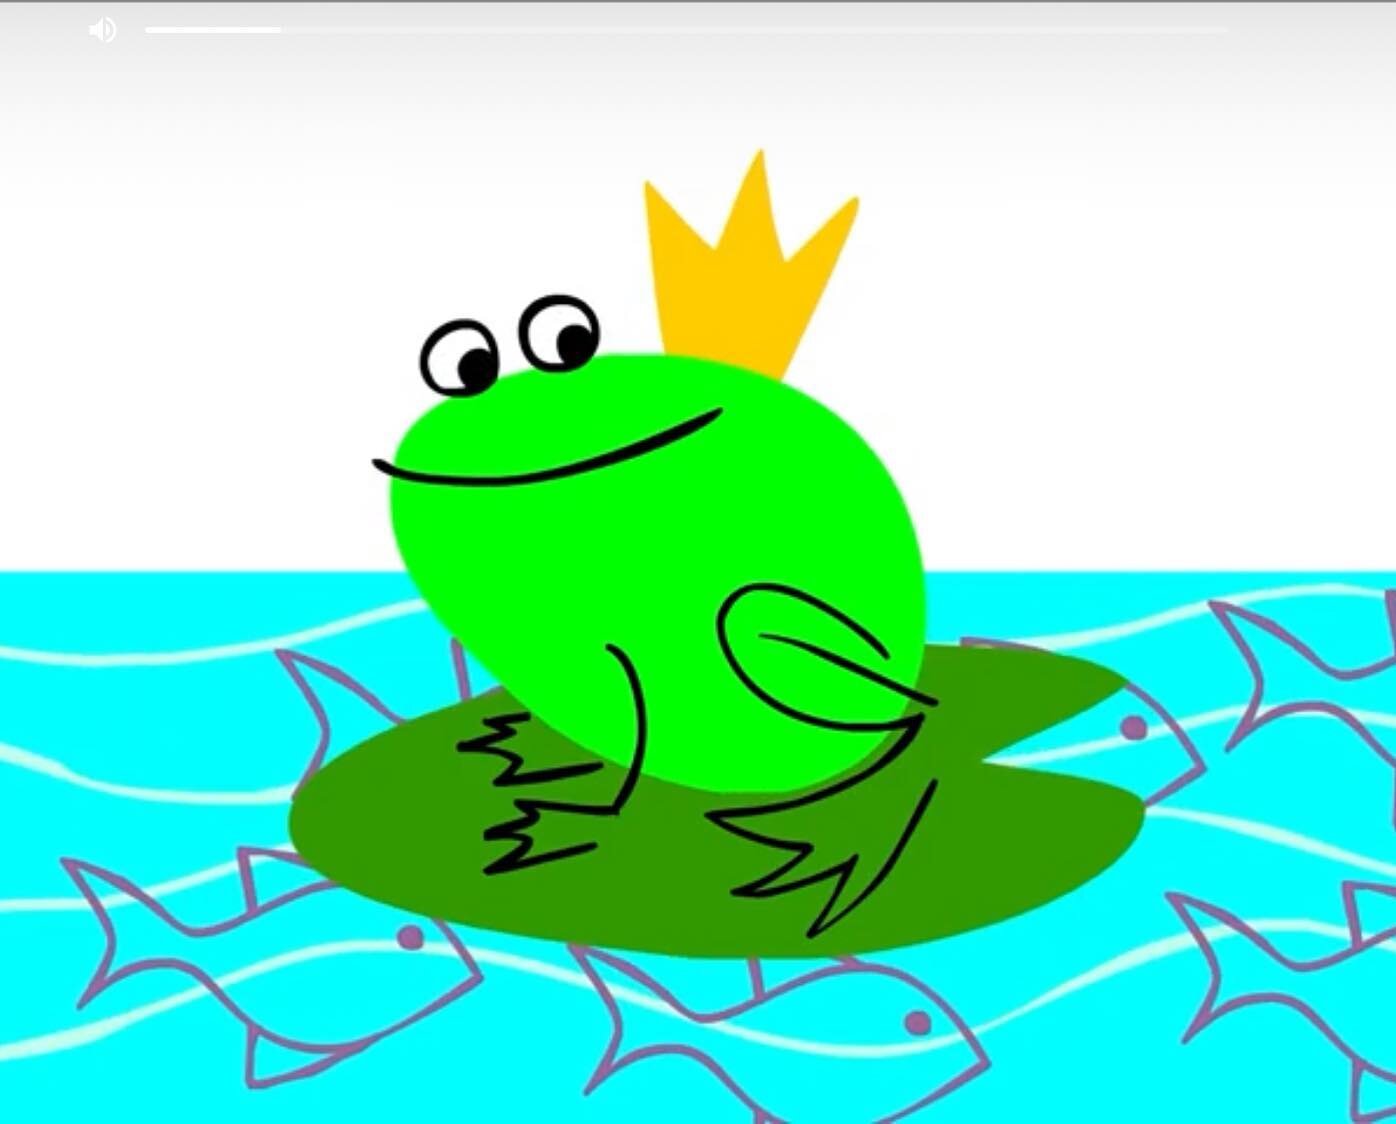 Had such a smile on my face today when I heard that our little chilled out peacetime frog has been traveling the world sharing his wisdom of just how to sail down a river in a lily pad. He won his category in the Cafe Irani Chaii International Film F